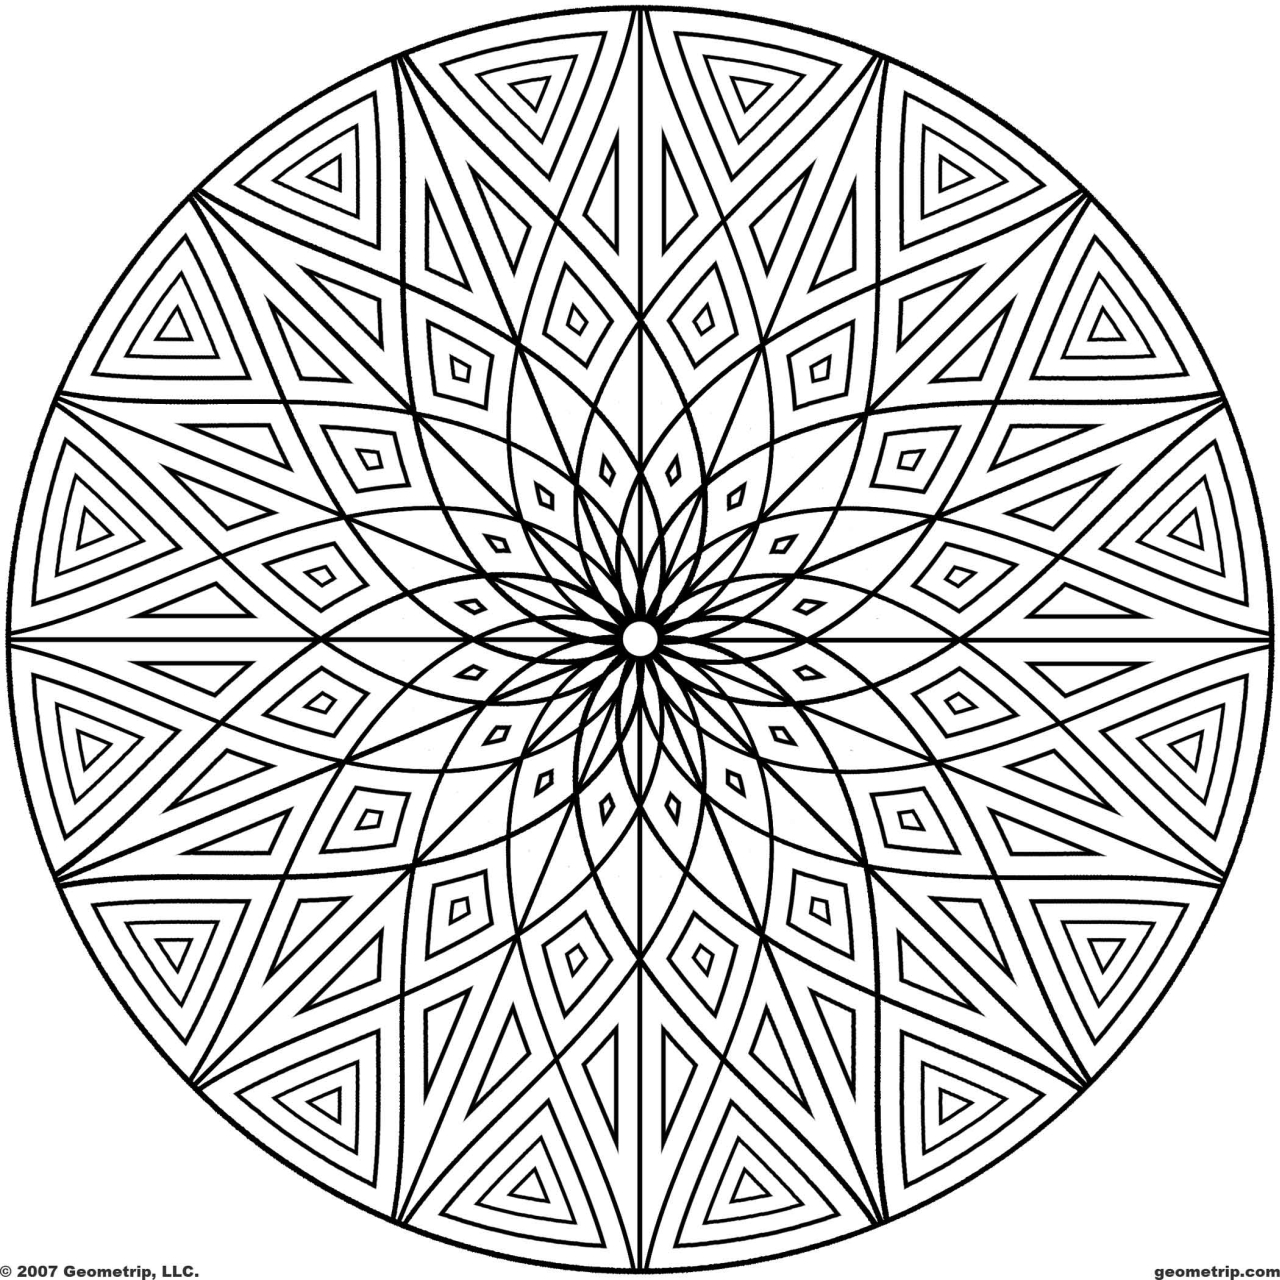 Get This Hard Geometric Coloring Pages to Print Out - 69031